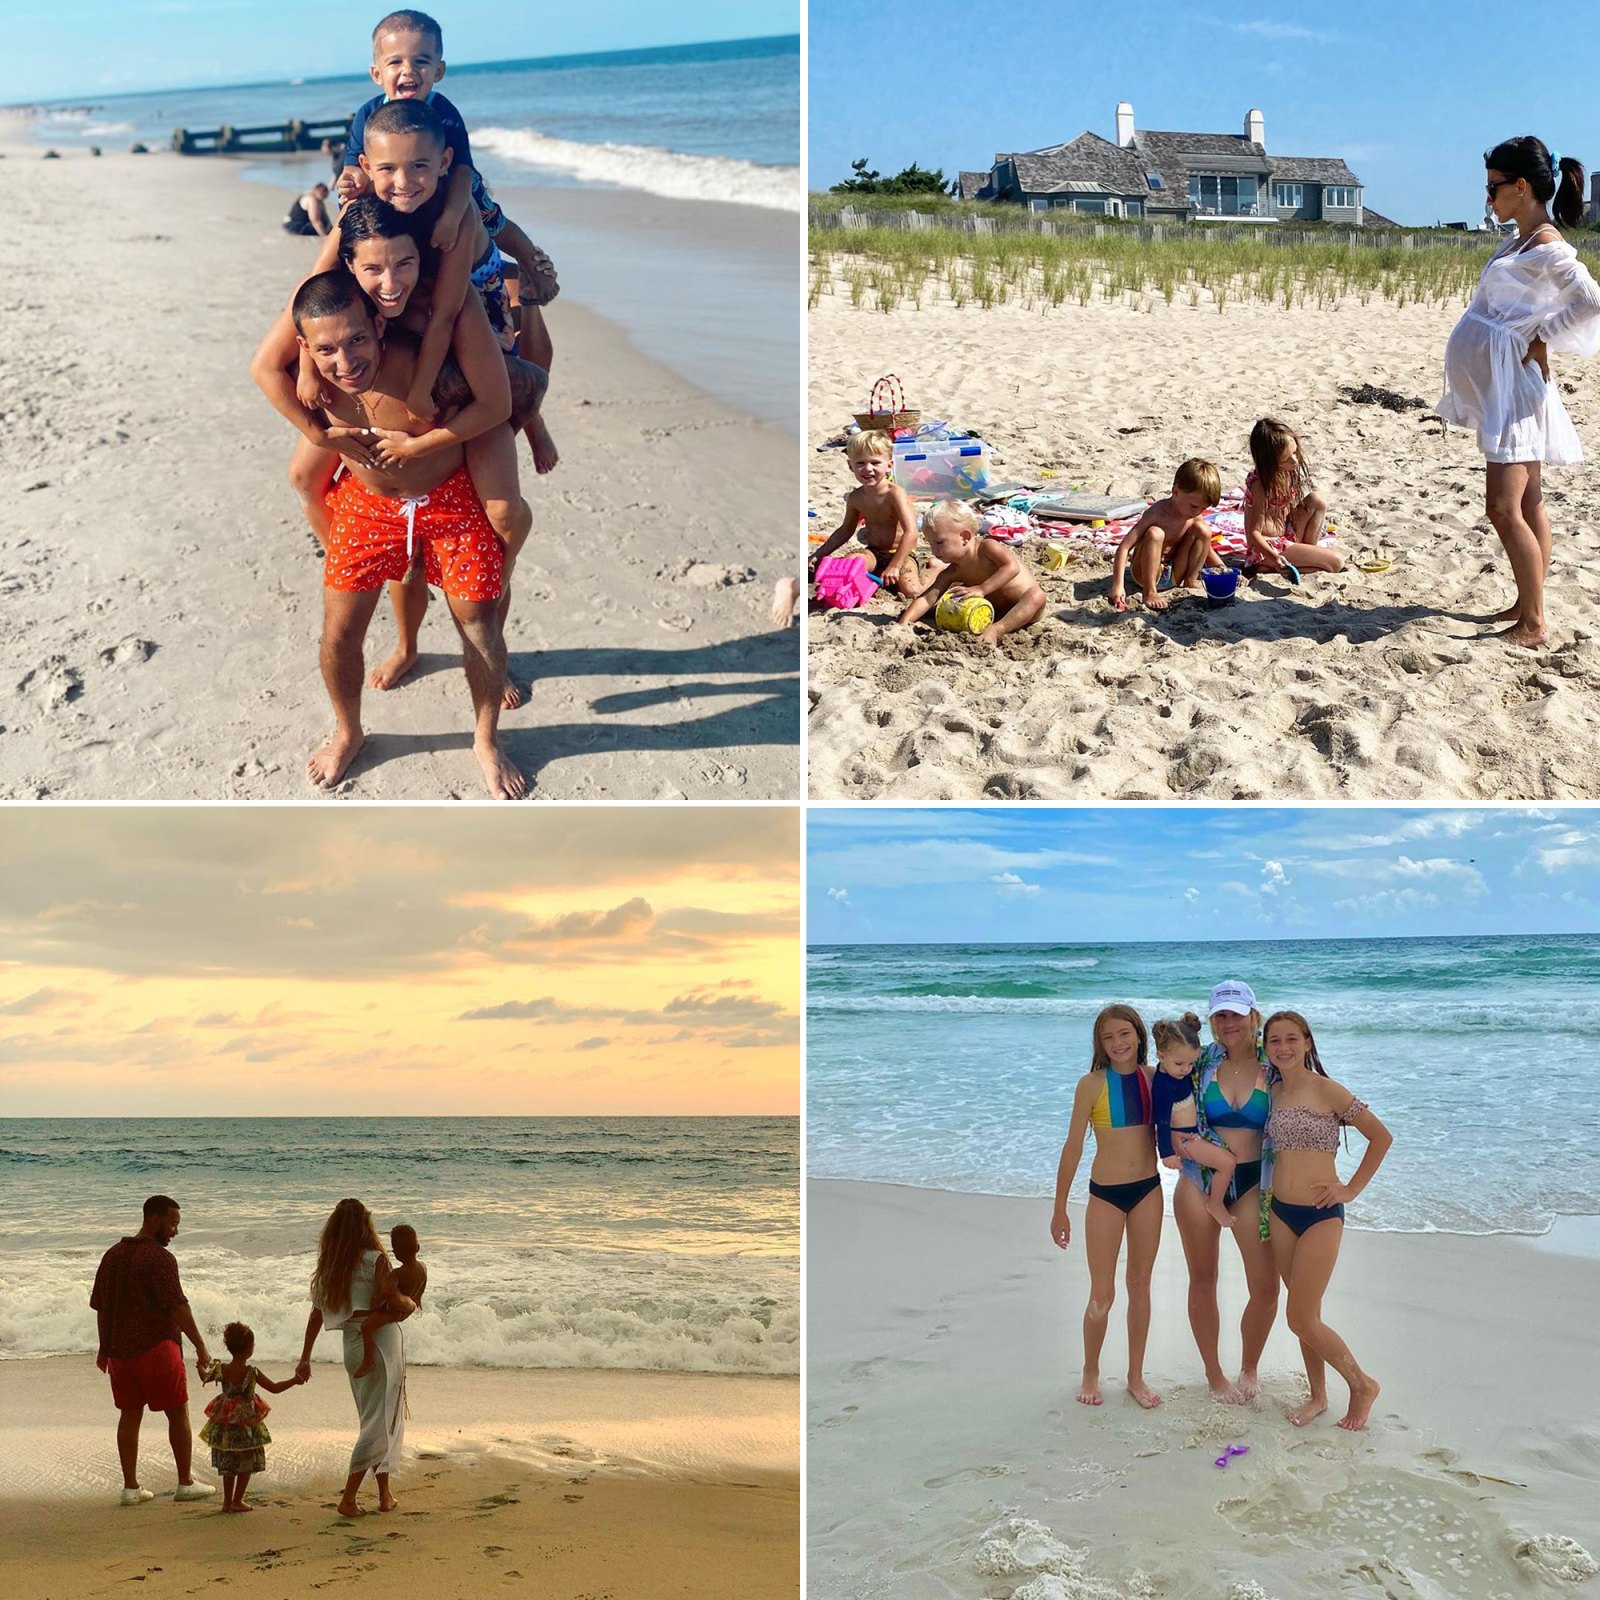 Celebs on the beach with their families